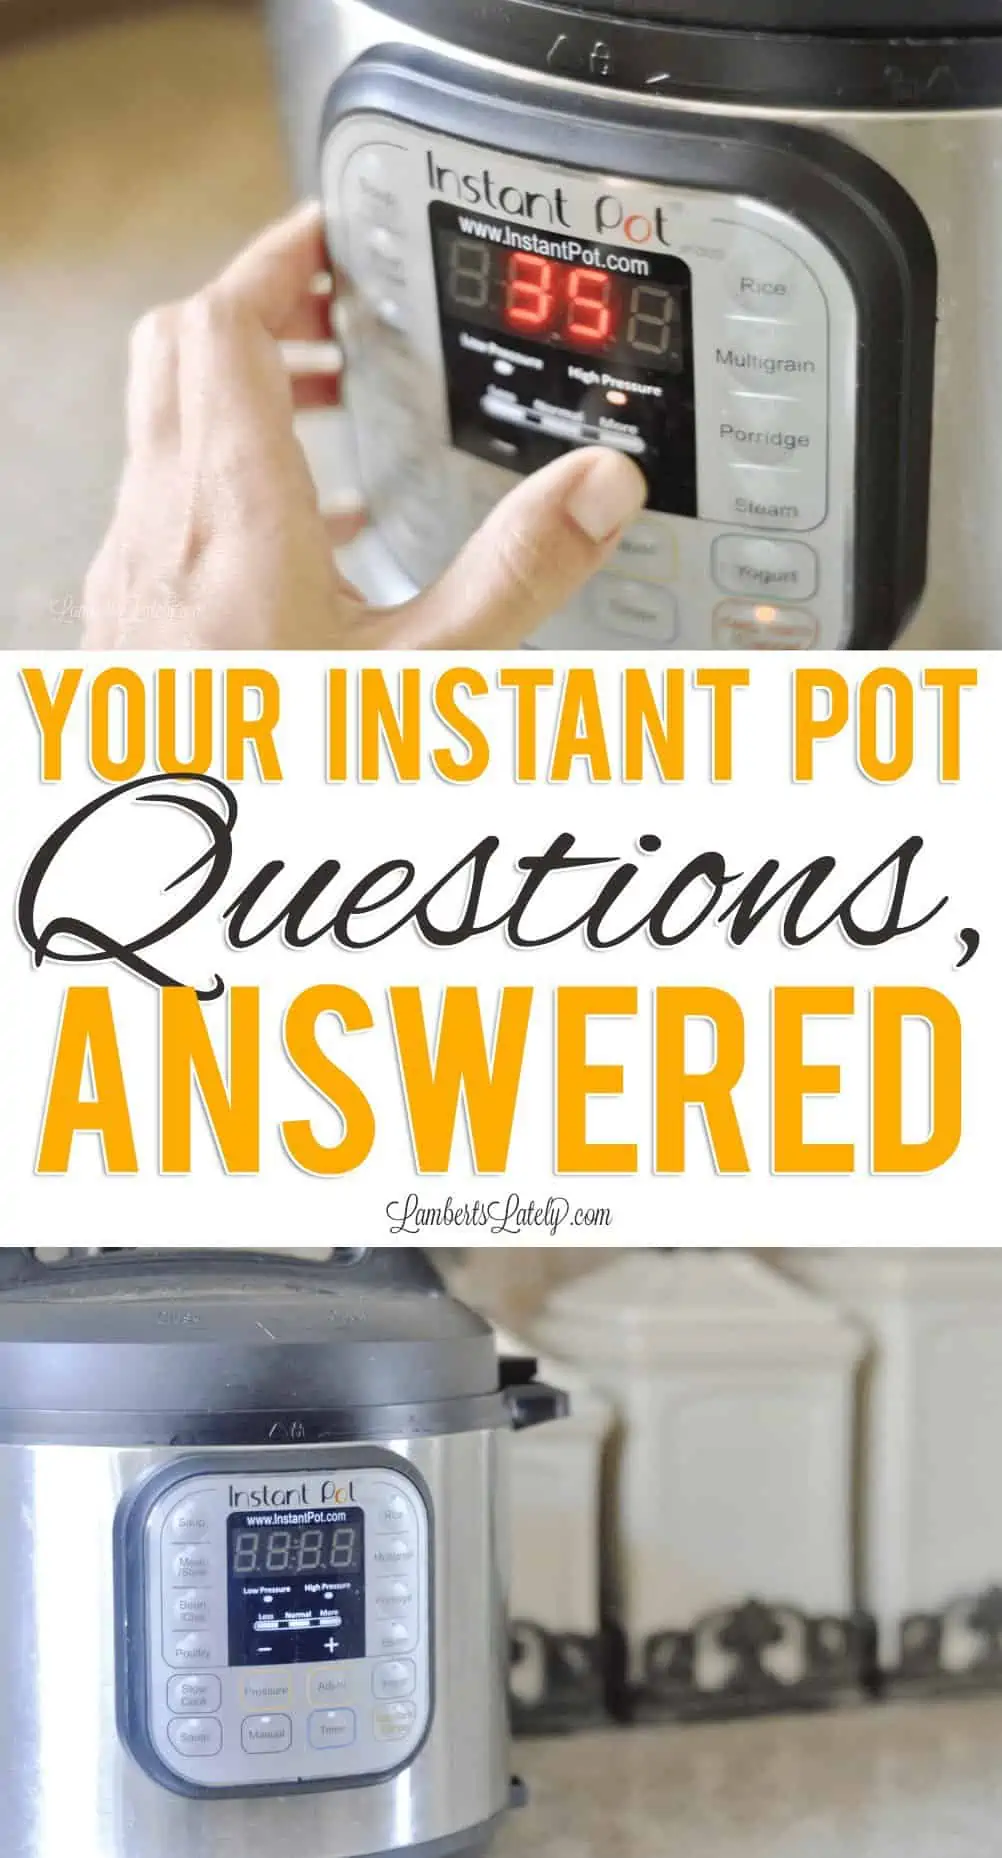 your instant pot questions, answered.